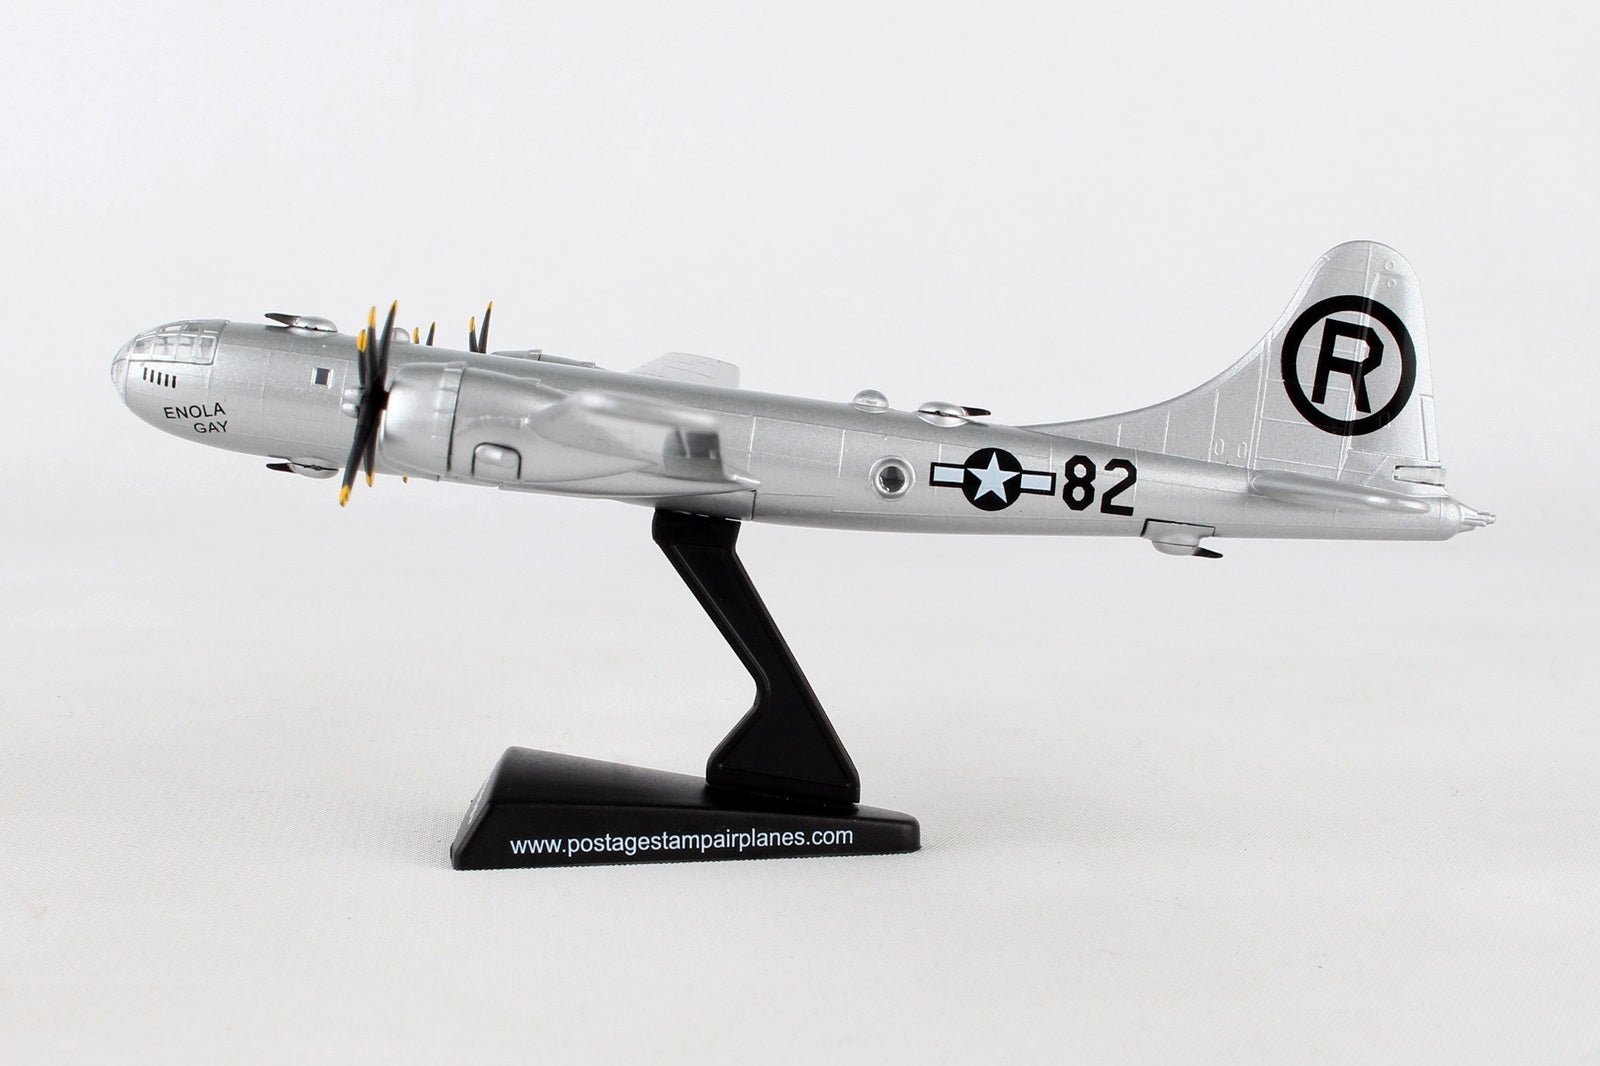 Daron® "Postage Stamp" B - 29 Superfortress Enola Gay Diecast Collectible Airplane, 1/200 Scale